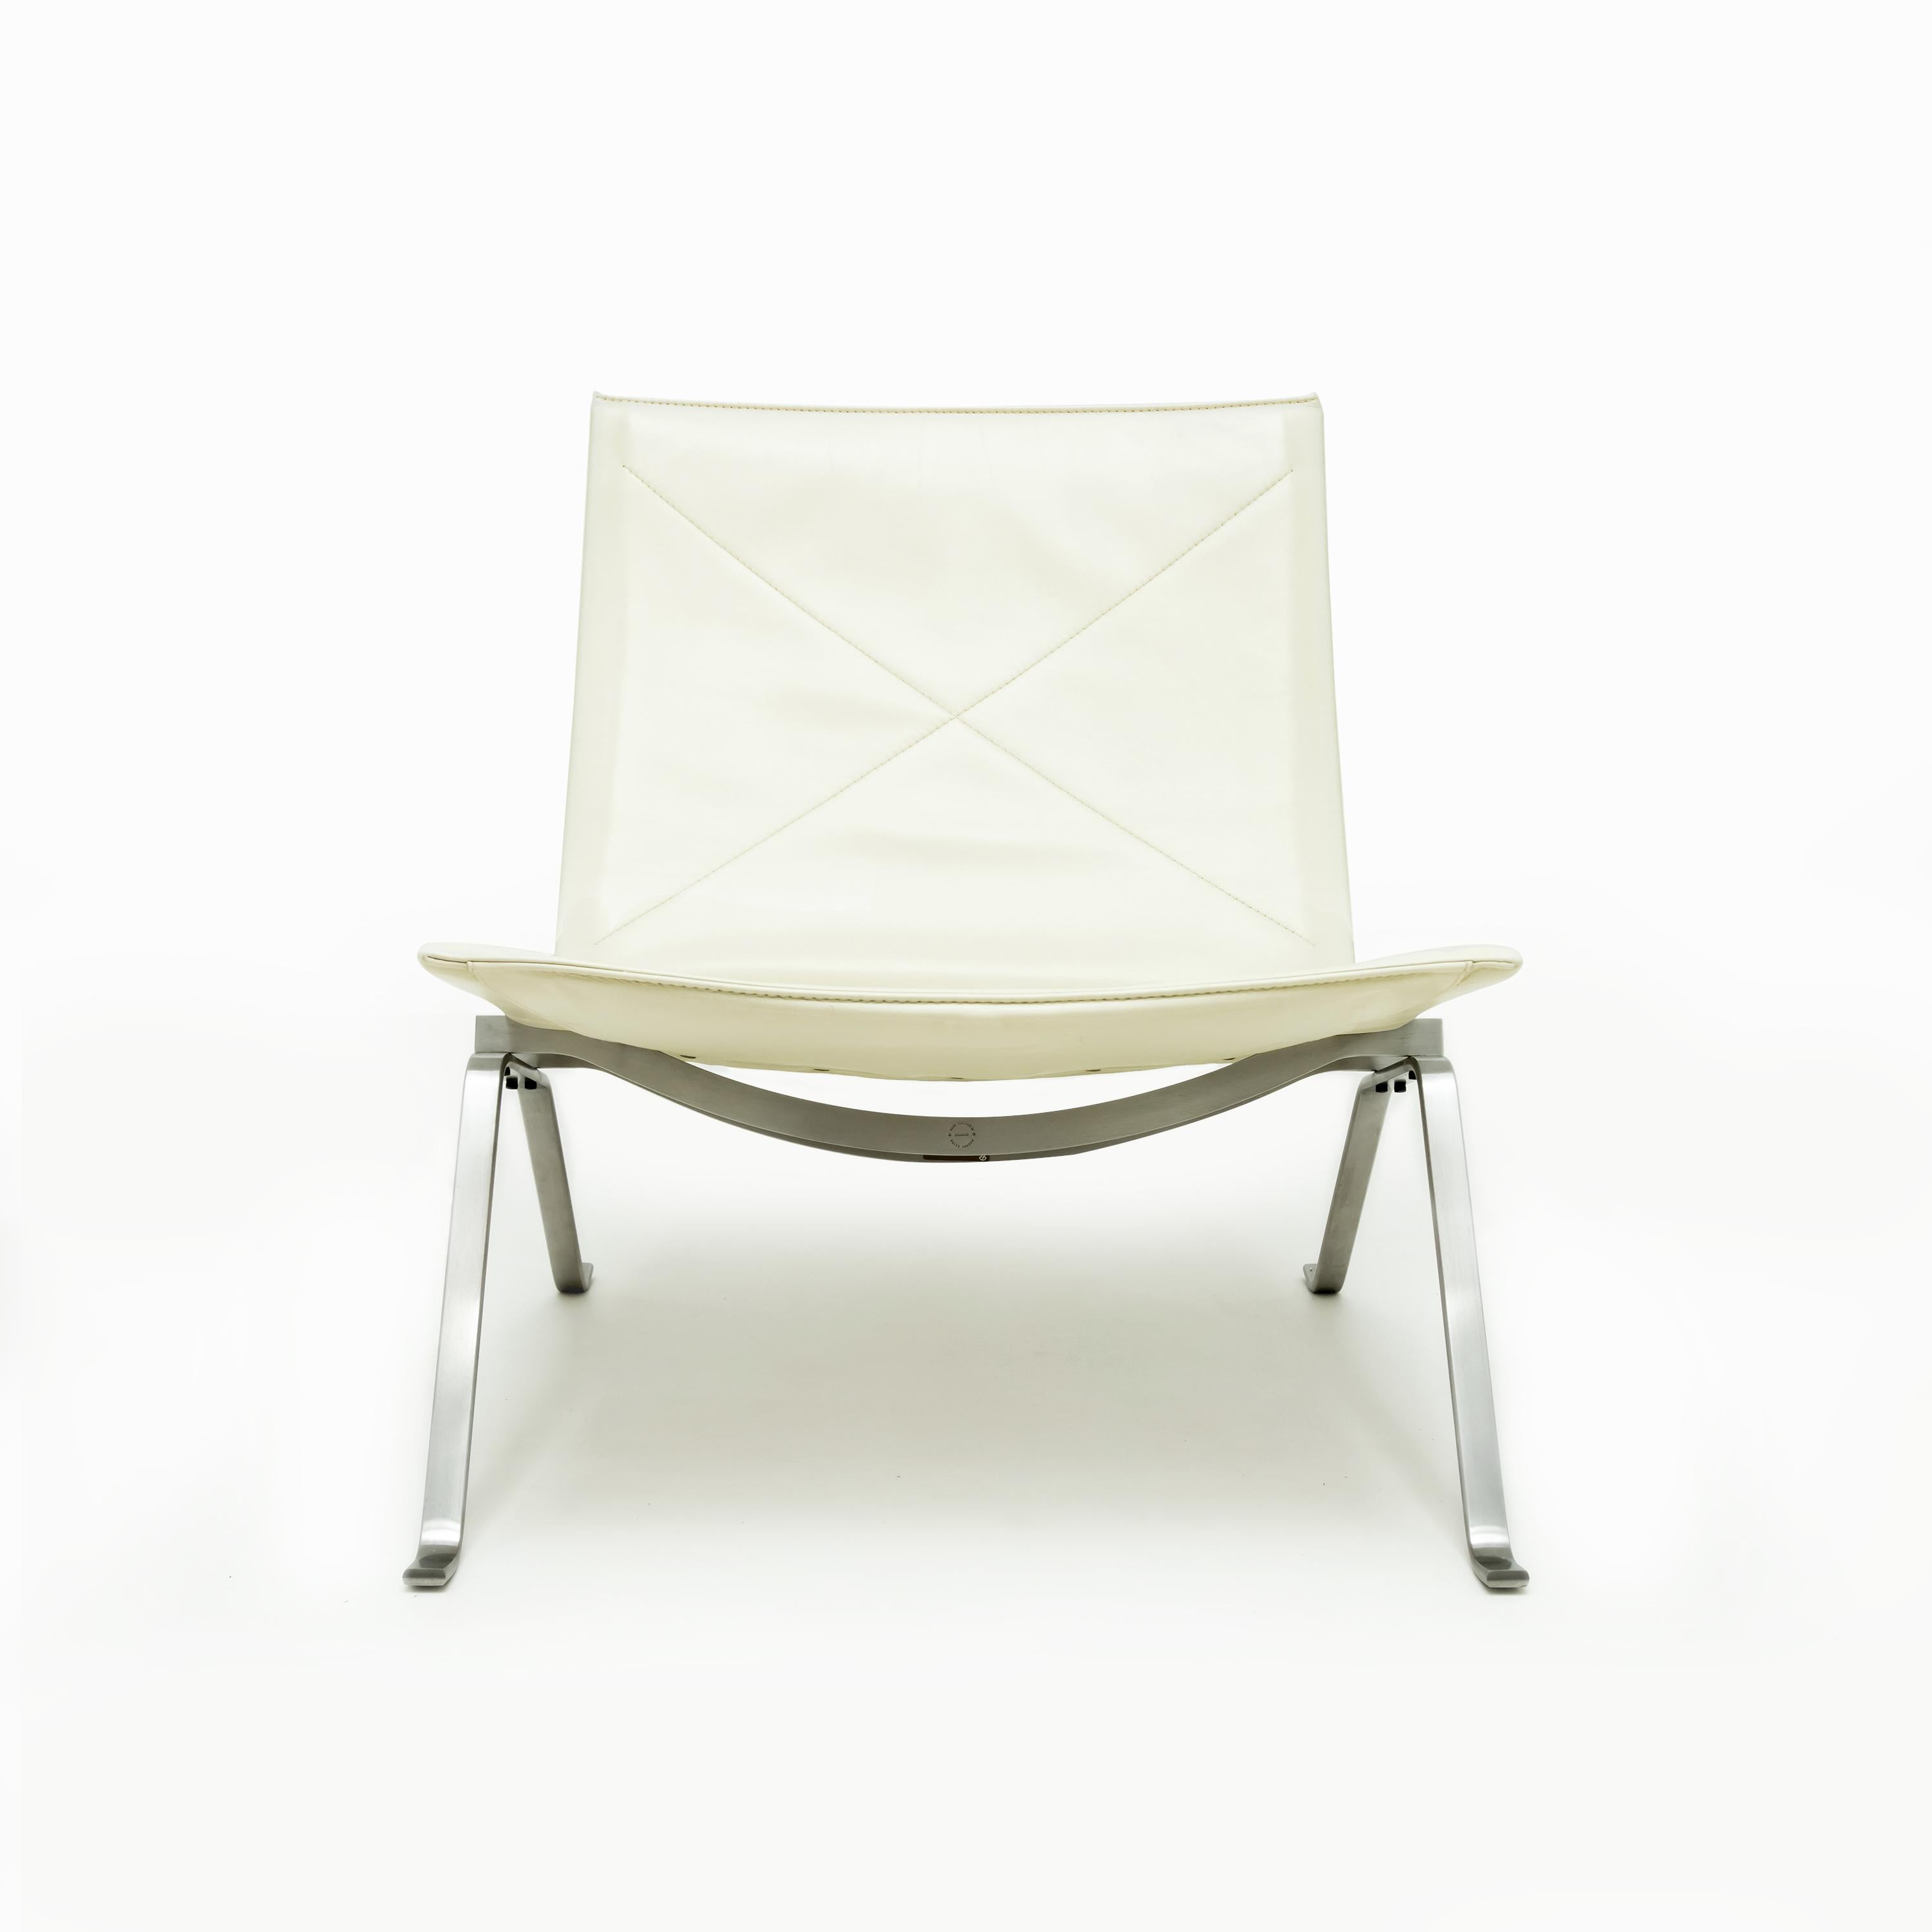 A Poul Kjaerholm PK22 Lounge chair in polished, brushed steel and cream leather for Fritz Hansen. There are two virtually identical chairs available. The price shown is per chair.

Originally designed in 1956 the PK22 stands out as one of